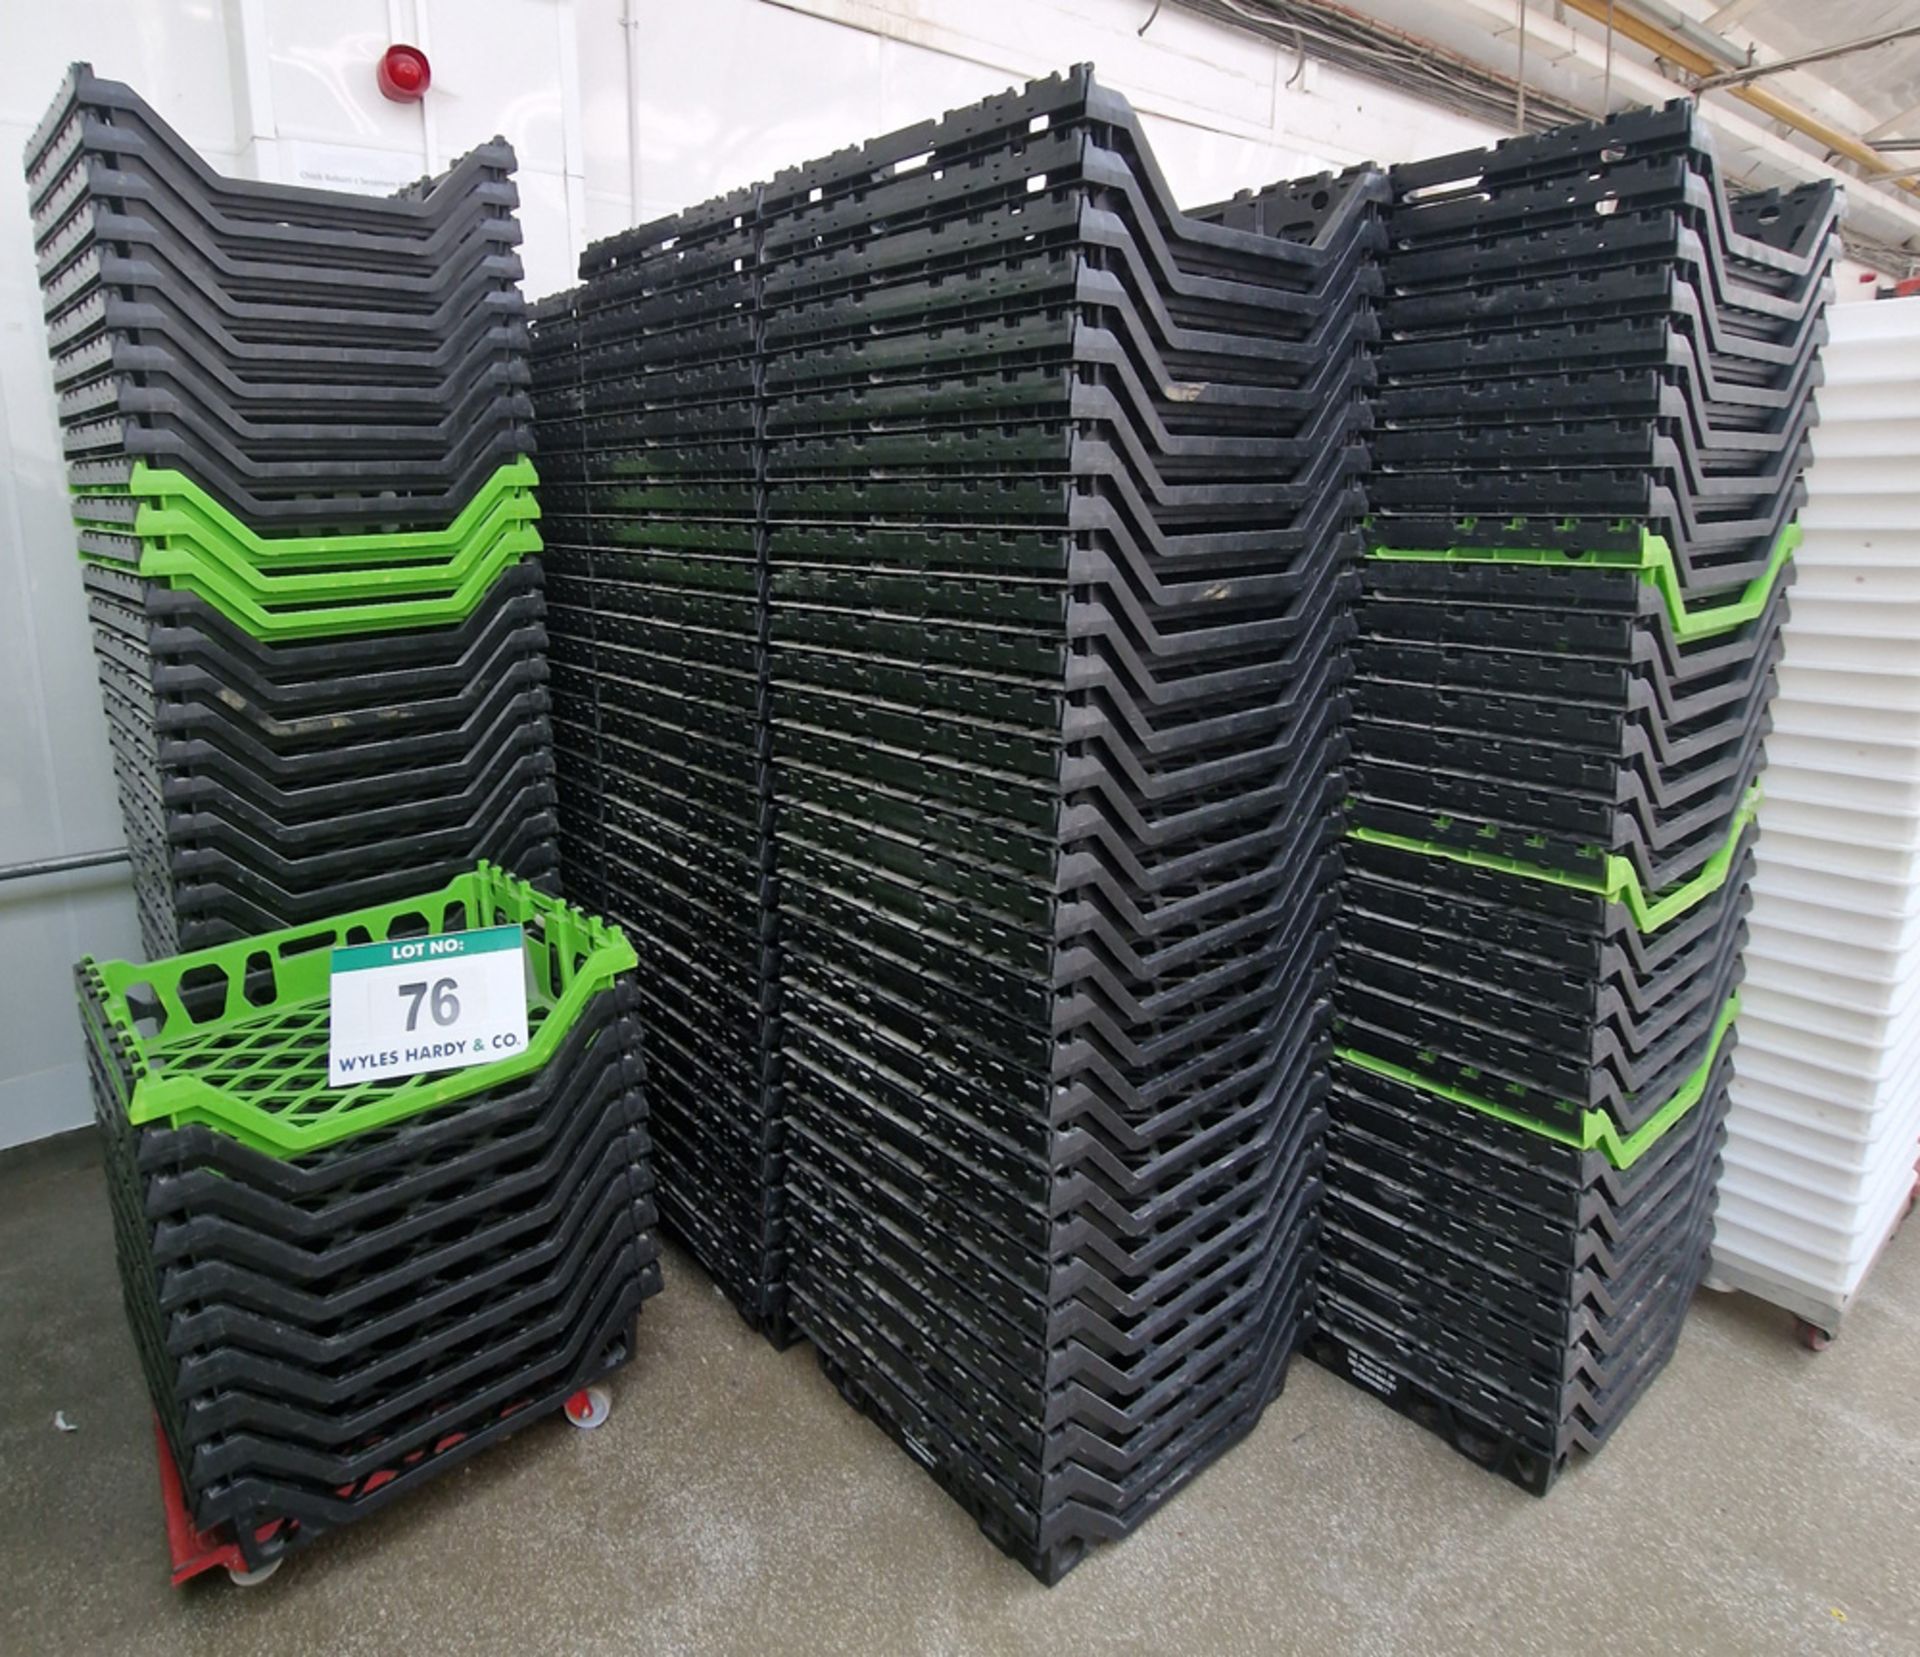 Two Hundred and Fifty Three Green/Black Plastic Stacking Bread Baskets, each approx. 580mm x 620mm x